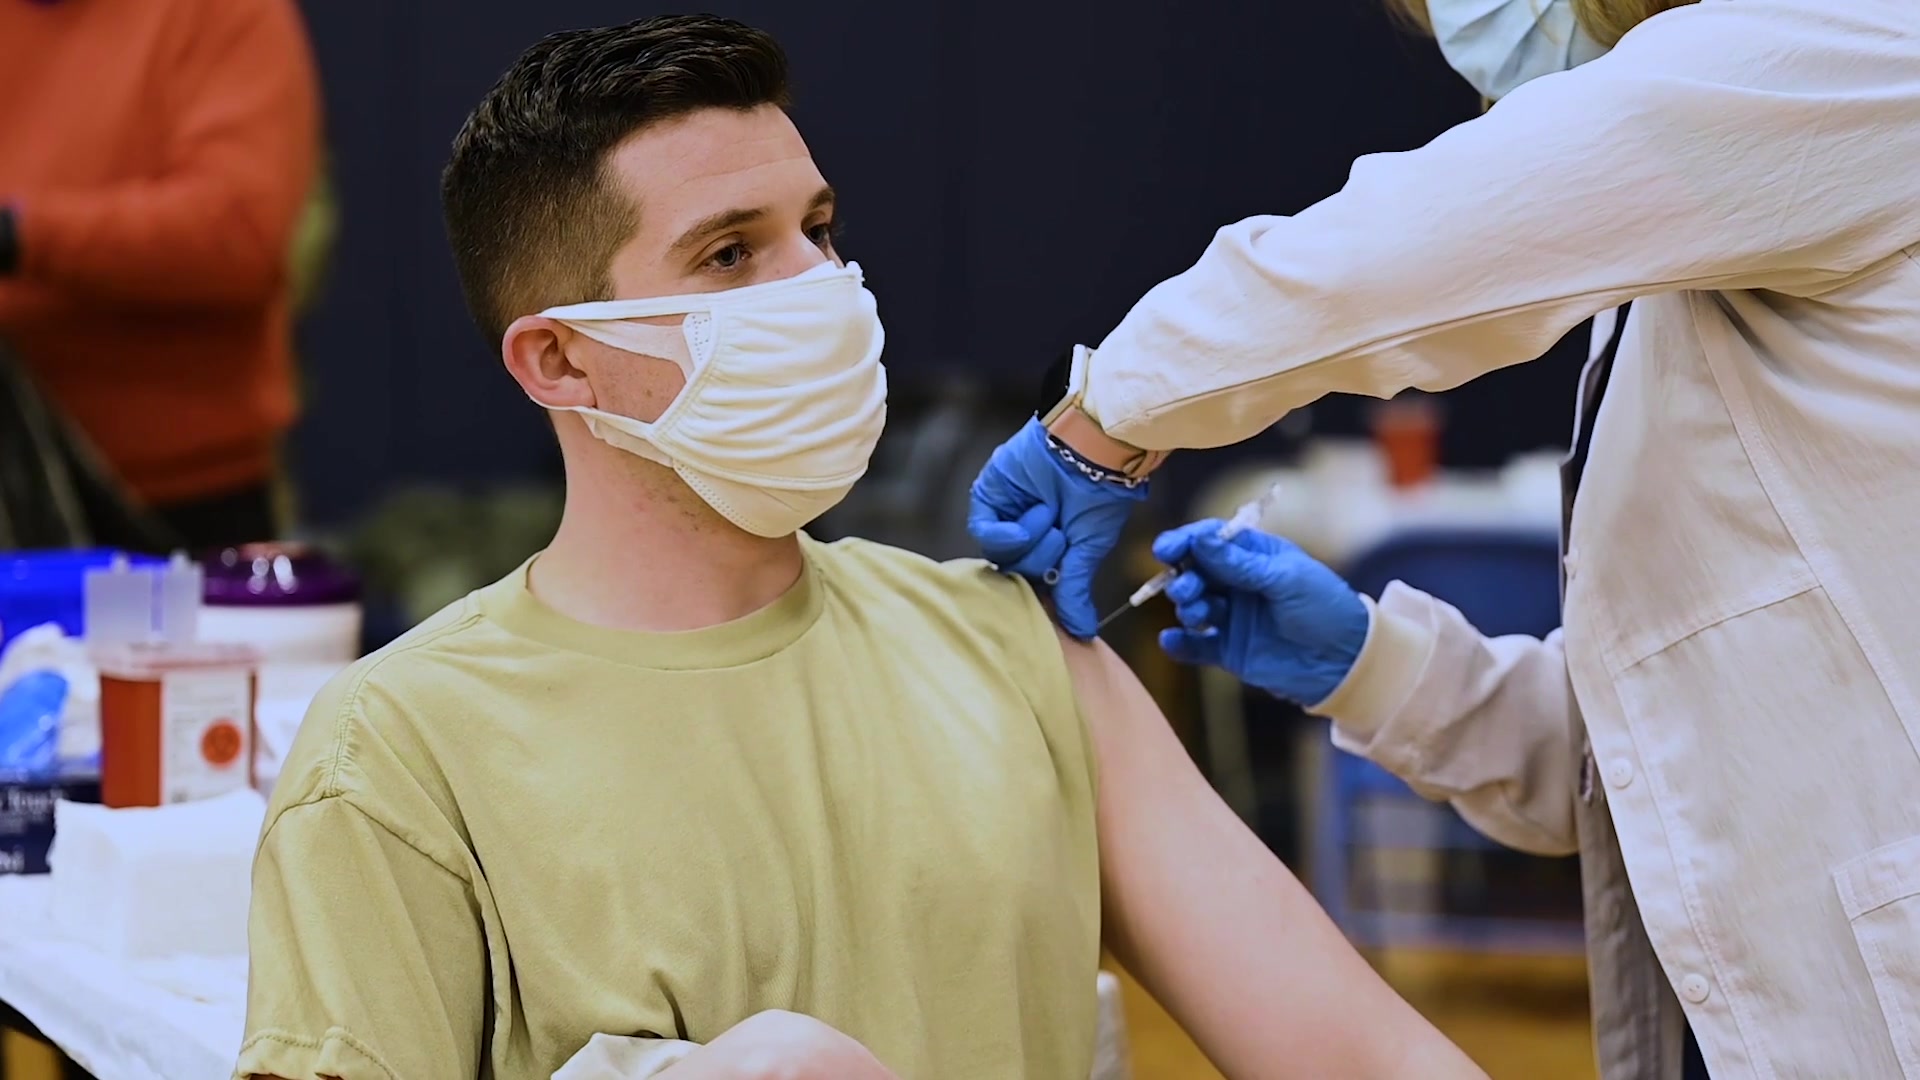 Members of the 17th Medical Group at Goodfellow AFB administered the first doses of the COVID-19 vaccine on Wed., Jan. 20.  We talked with a few Airmen to understand why they decided to get the vaccine.